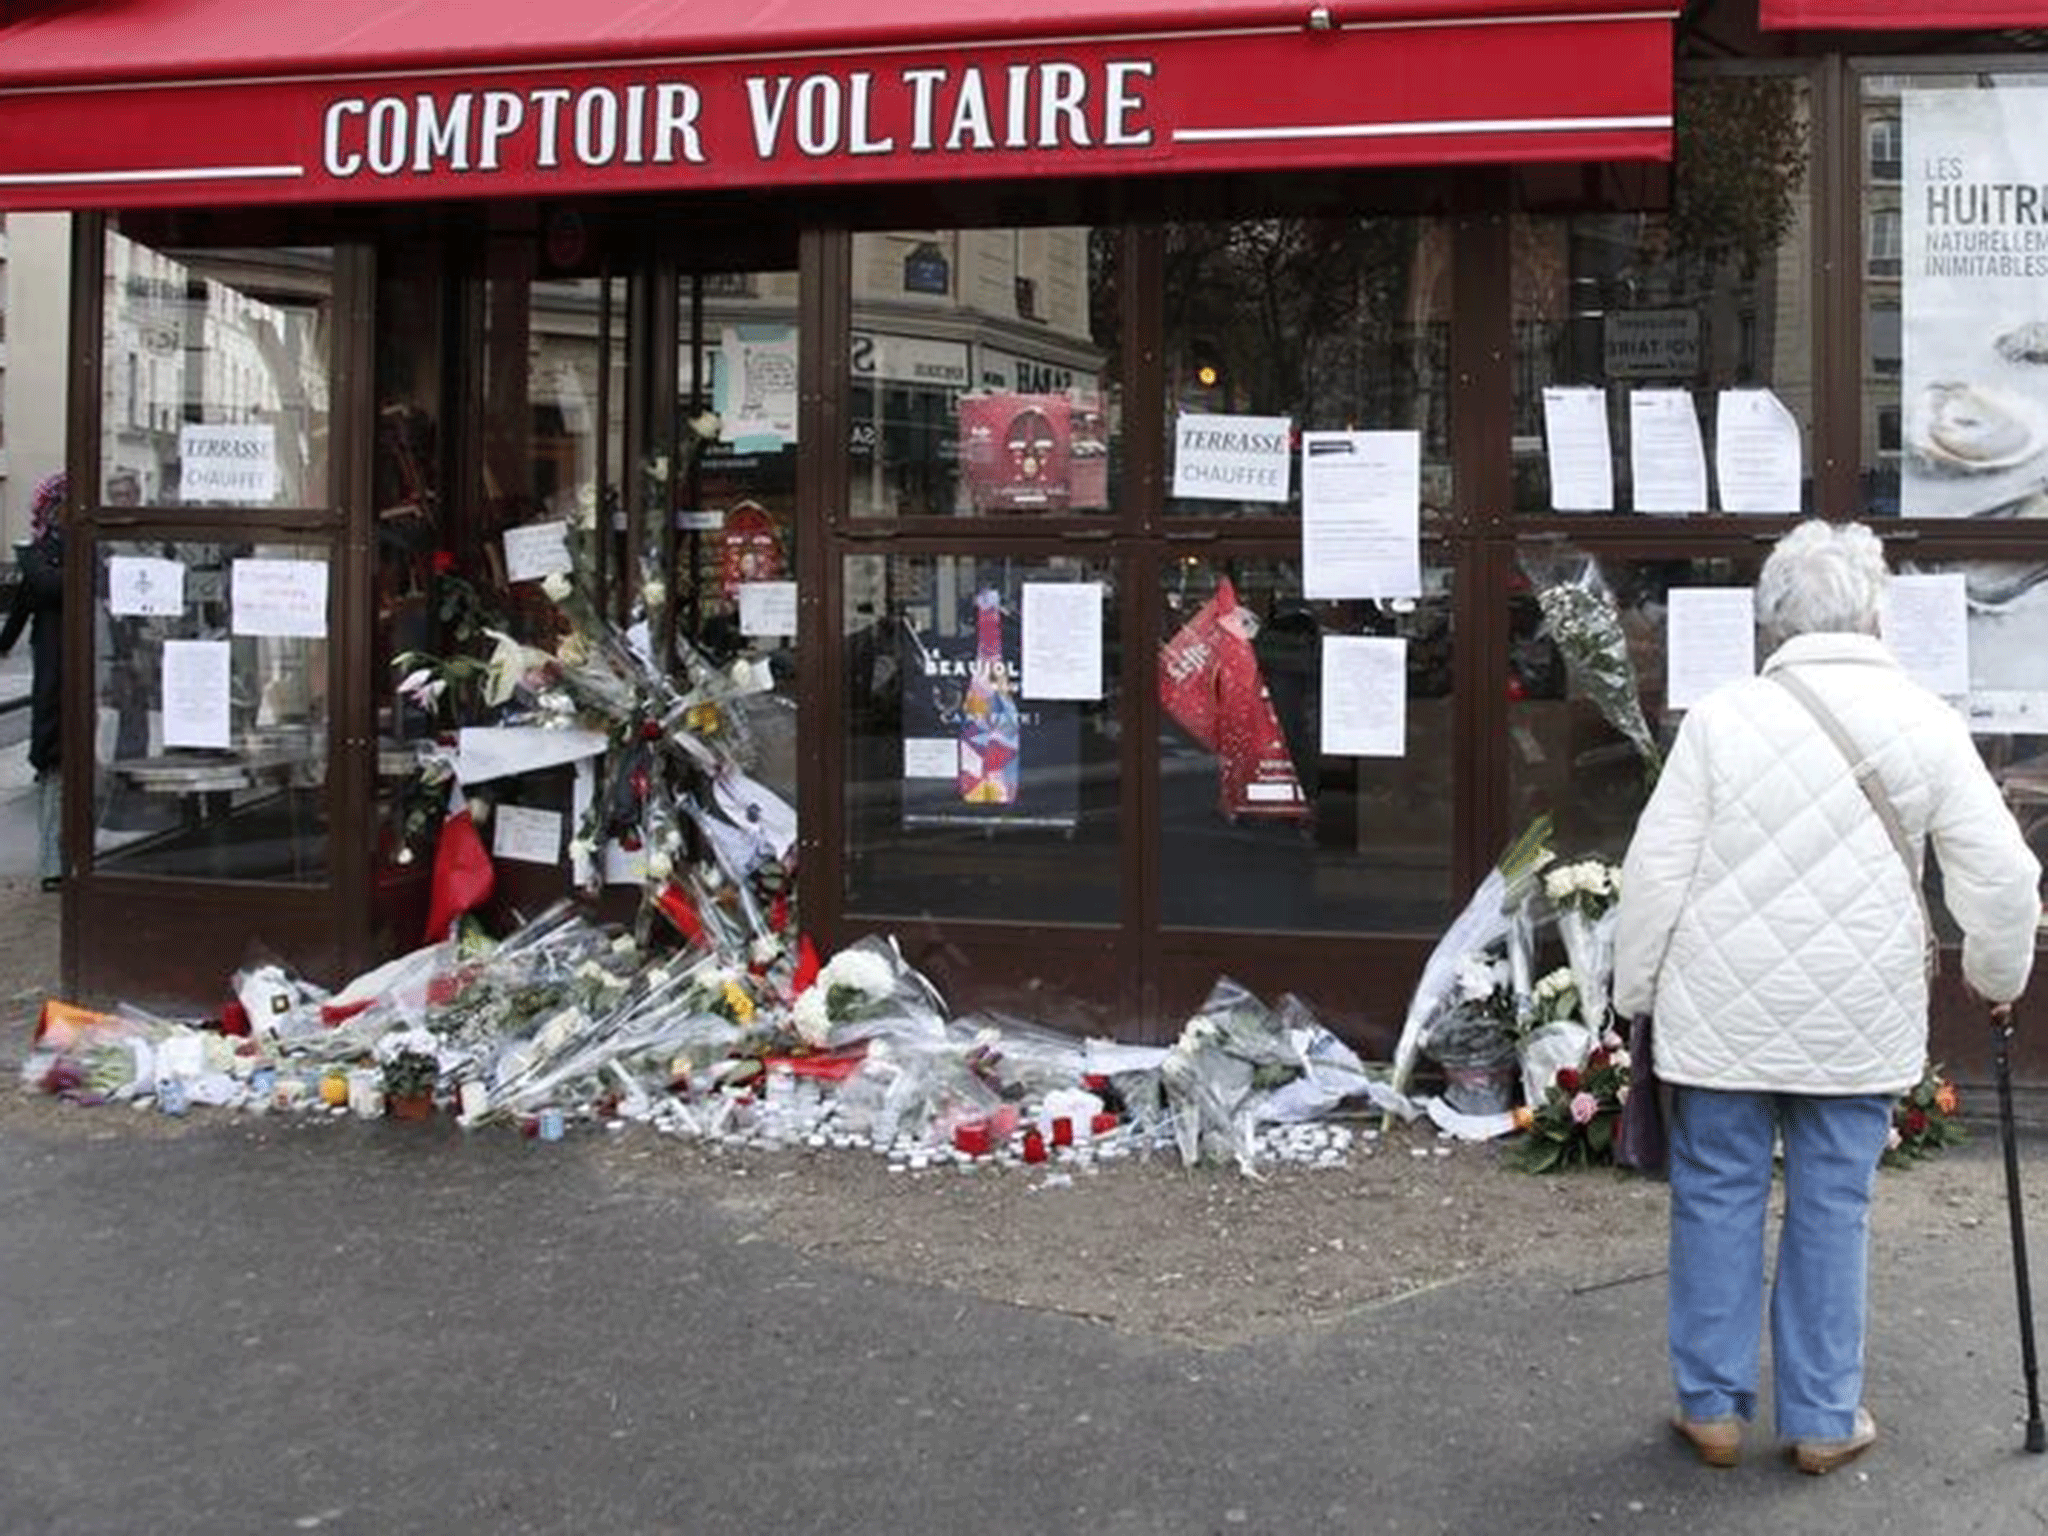 A woman stops to look at flowers, candles and messages in tribute to victims in front of the Comptoir Voltaire cafe, one of the sites of the deadly attacks in Paris, France, November 17, 2015.